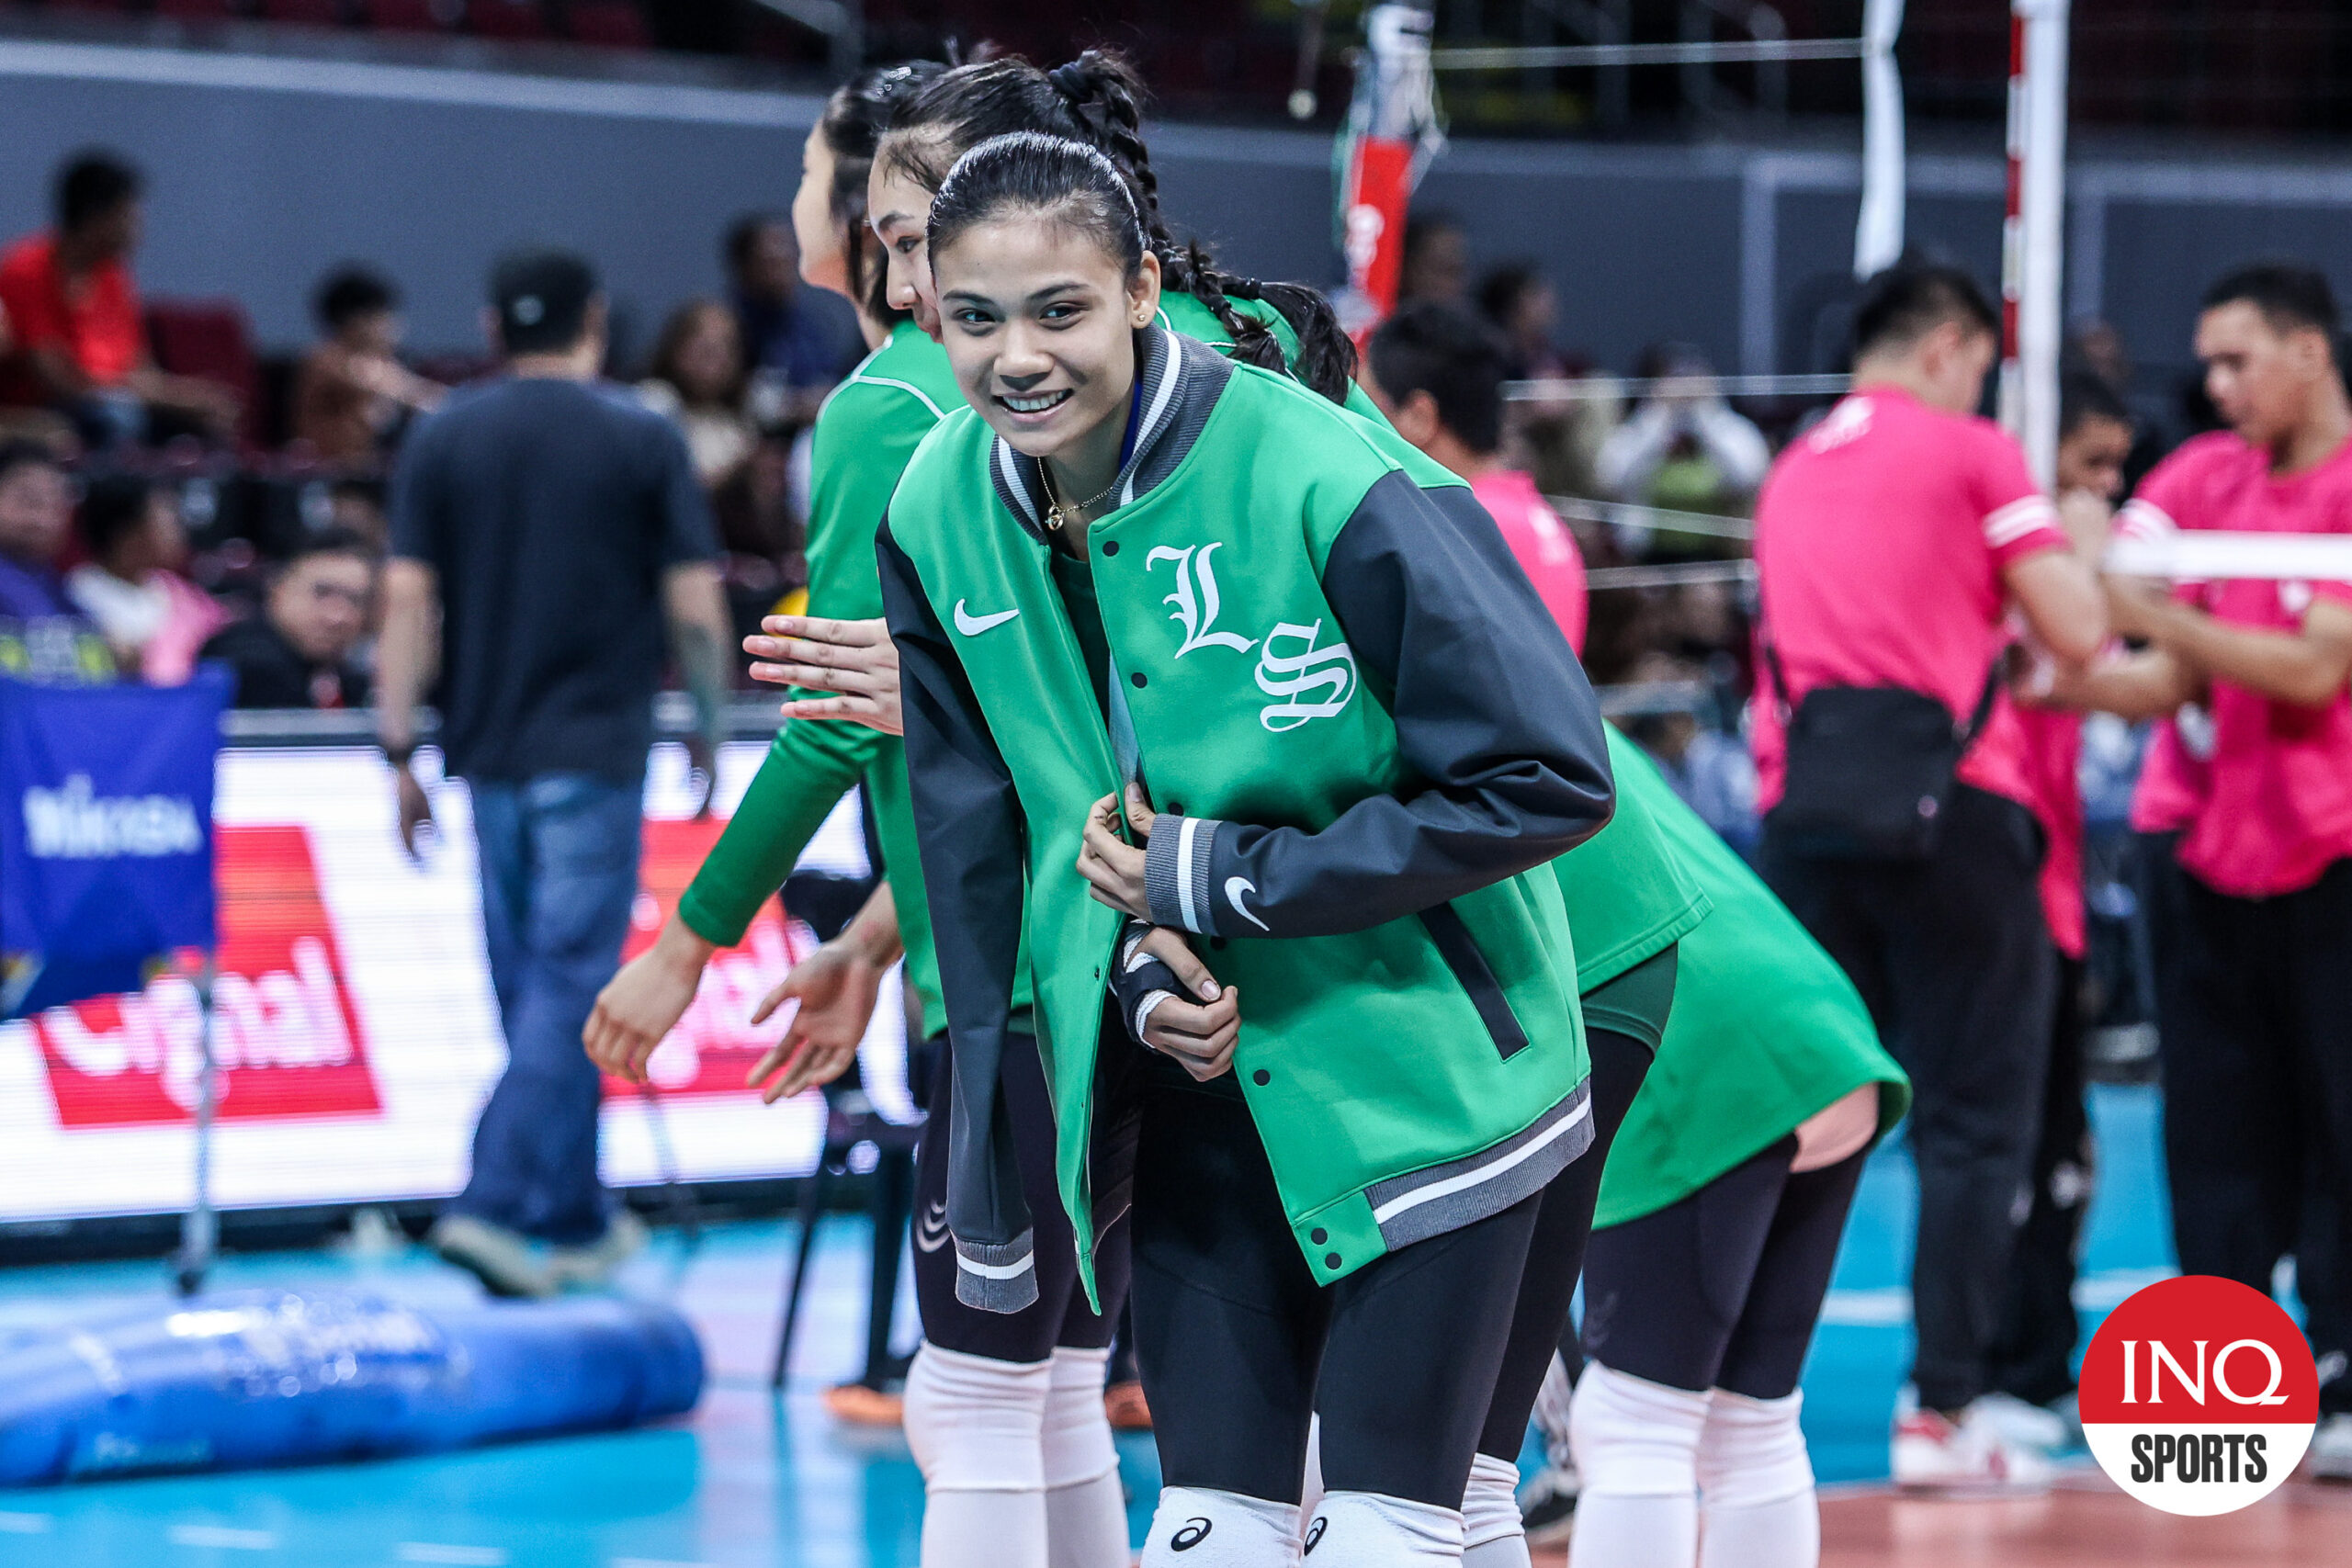 La Salle Lady Spikers star Angel Canino uaap volleyball